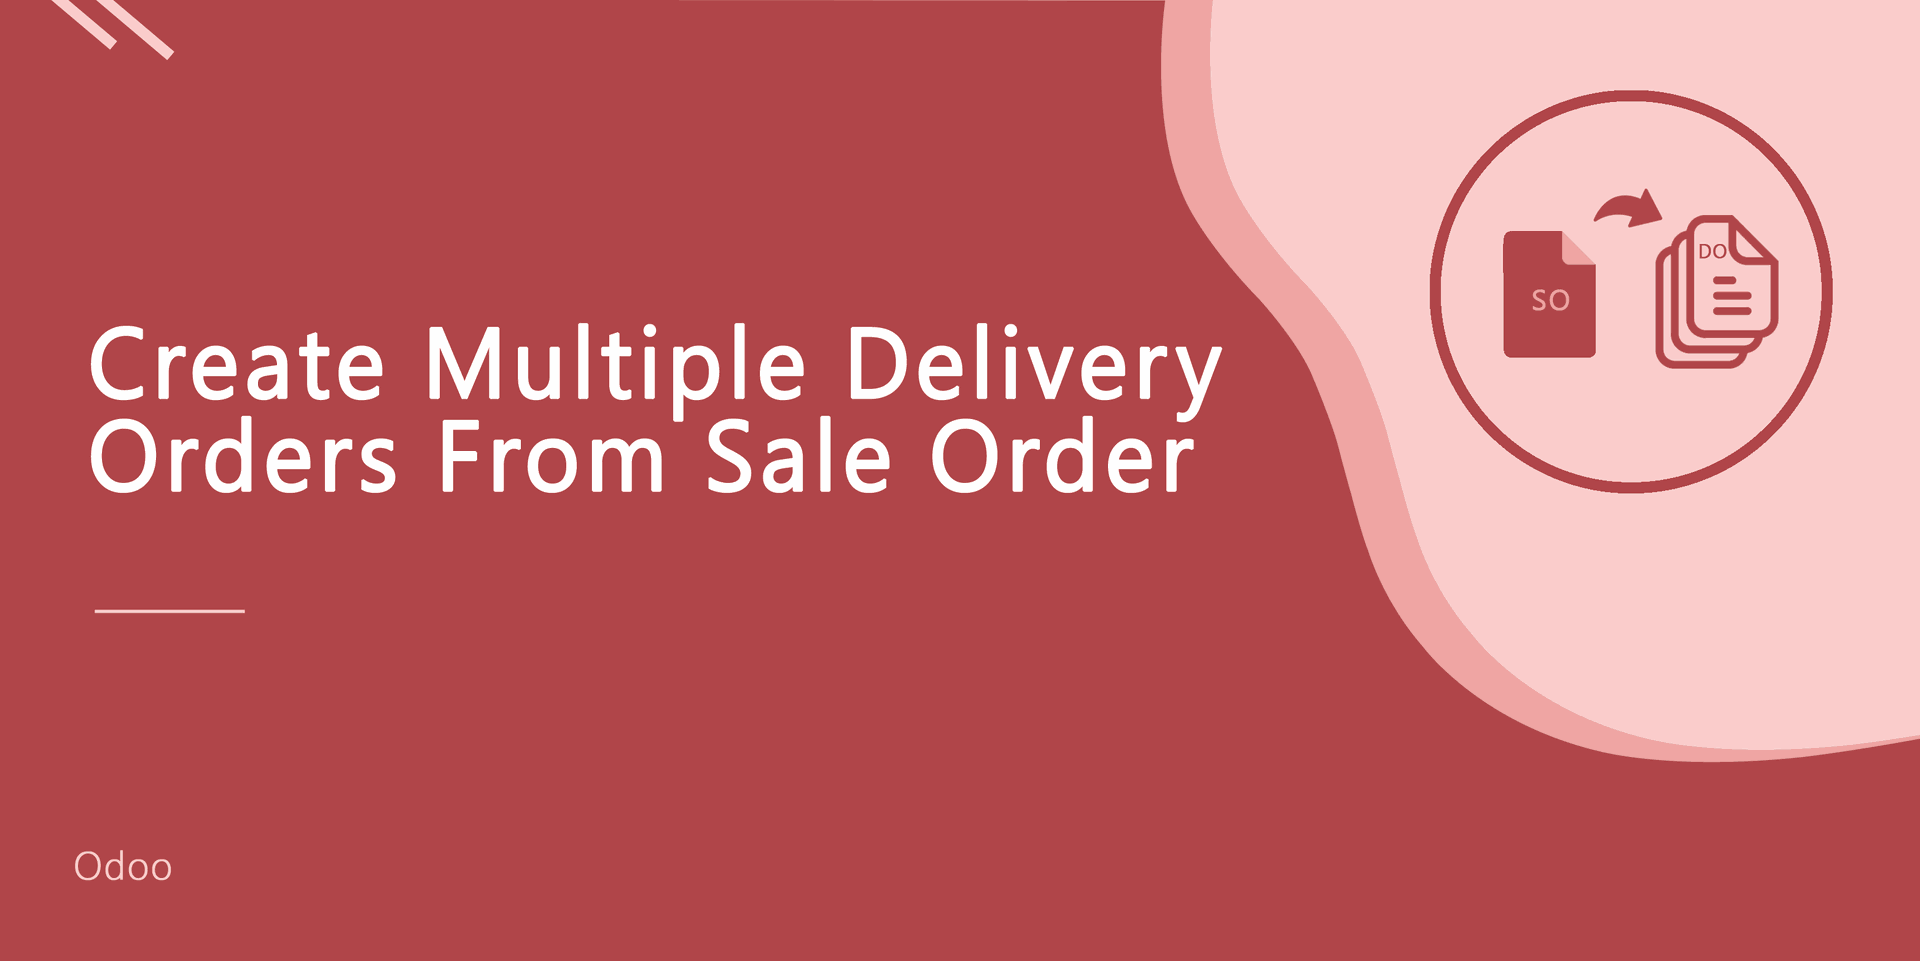 Create Multiple Delivery Orders From Sale Order
